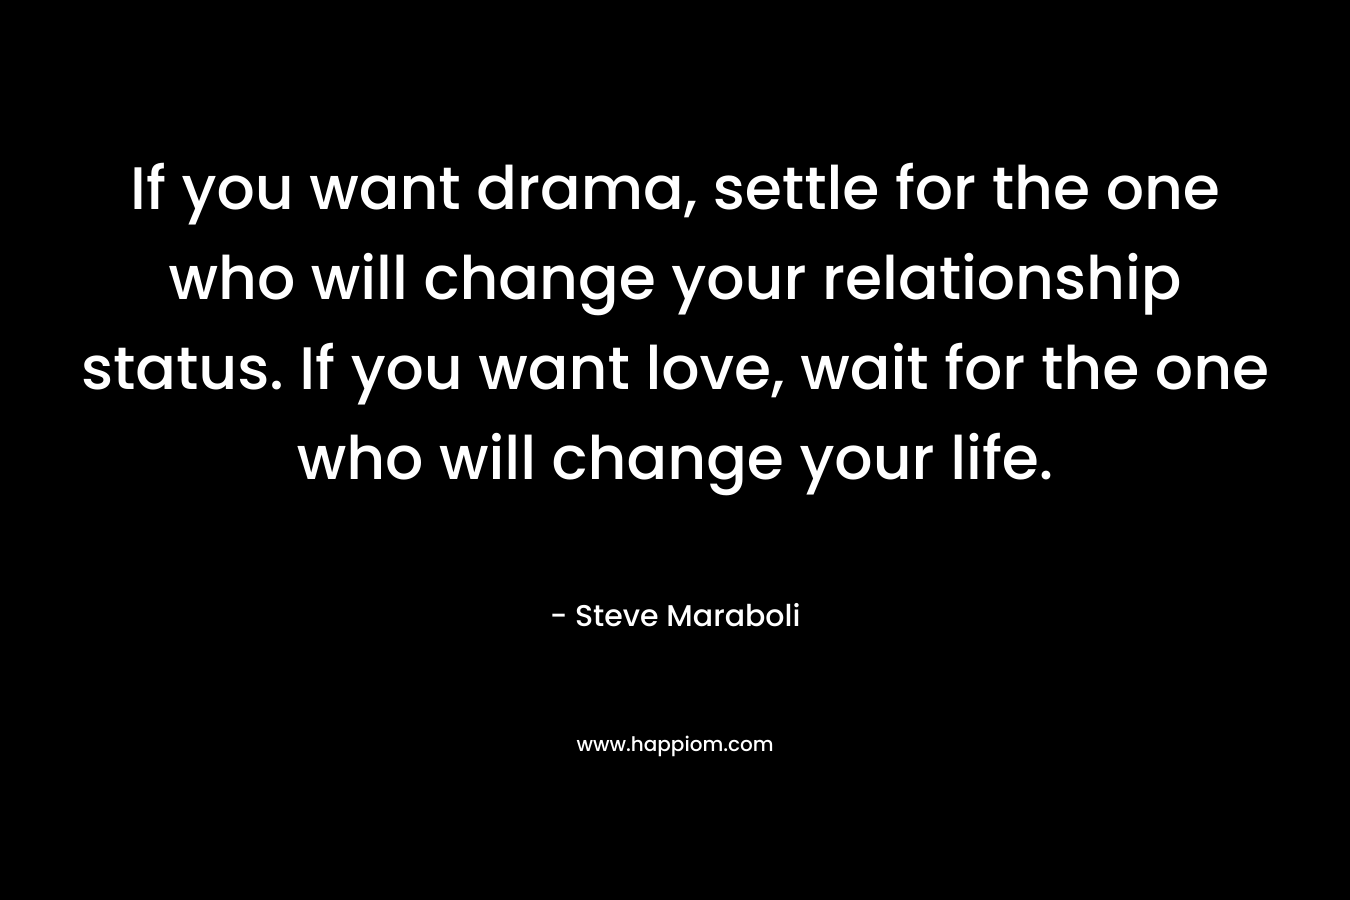 If you want drama, settle for the one who will change your relationship status. If you want love, wait for the one who will change your life. – Steve Maraboli